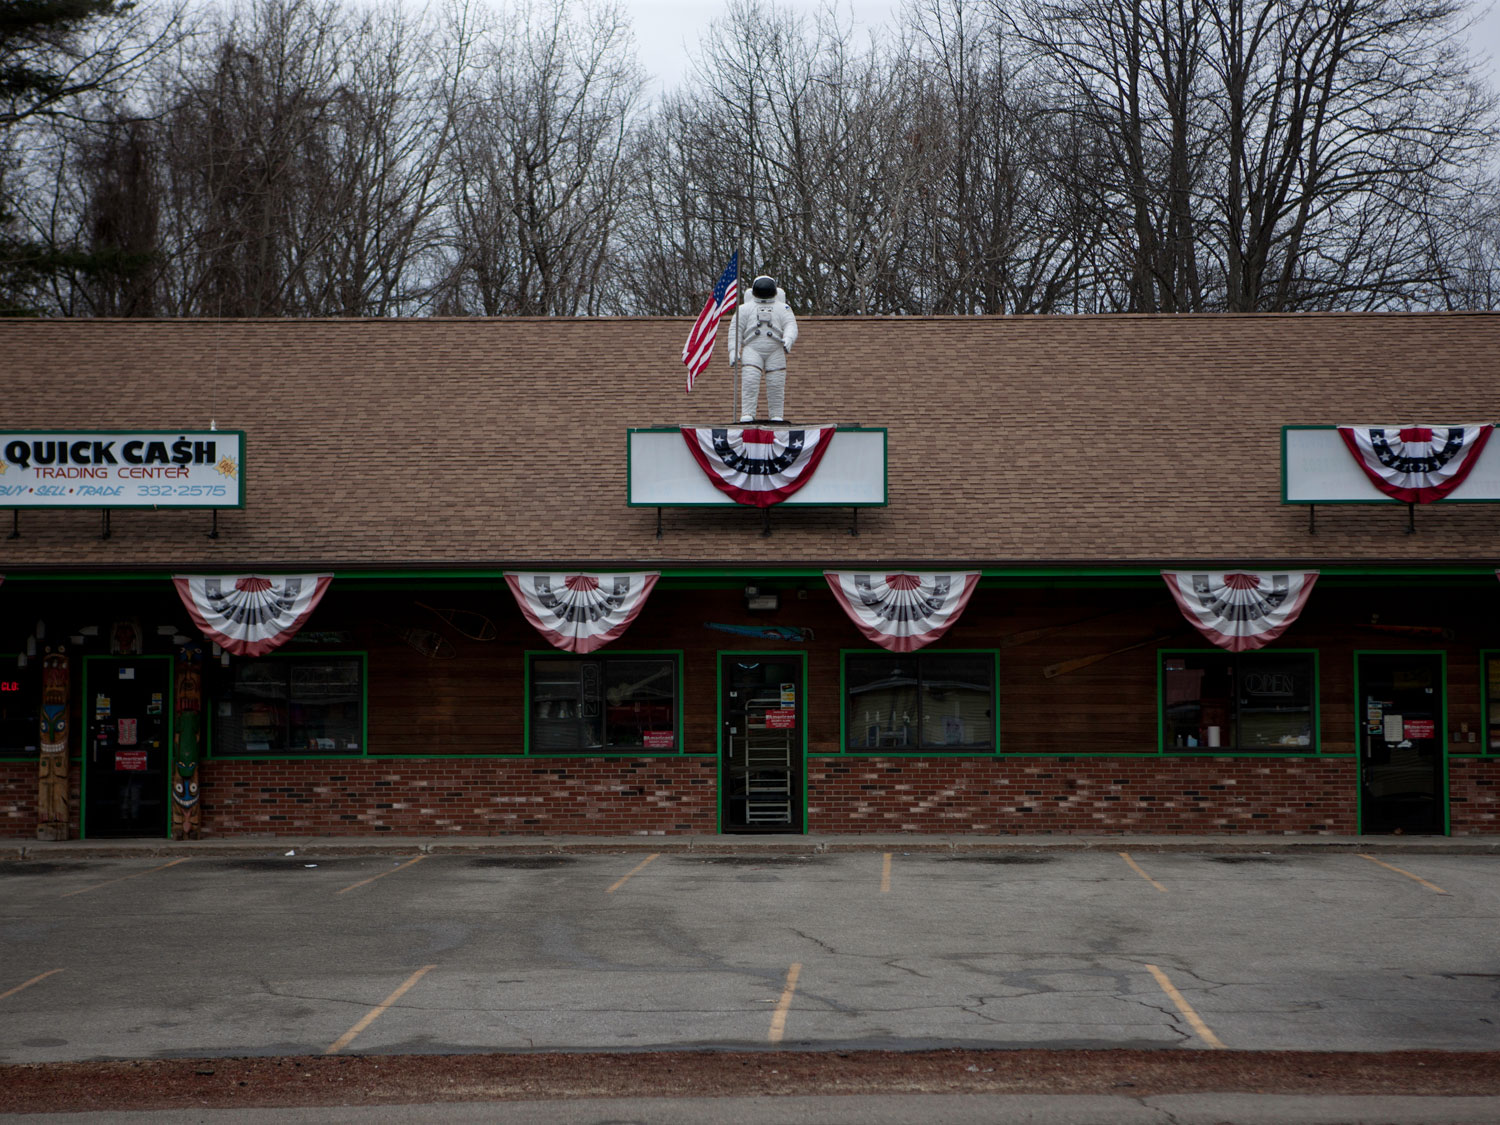 Image: Flags decorate a strip mall near Rochester, N.H. just days before the primary election. Jan. 8, 2012.